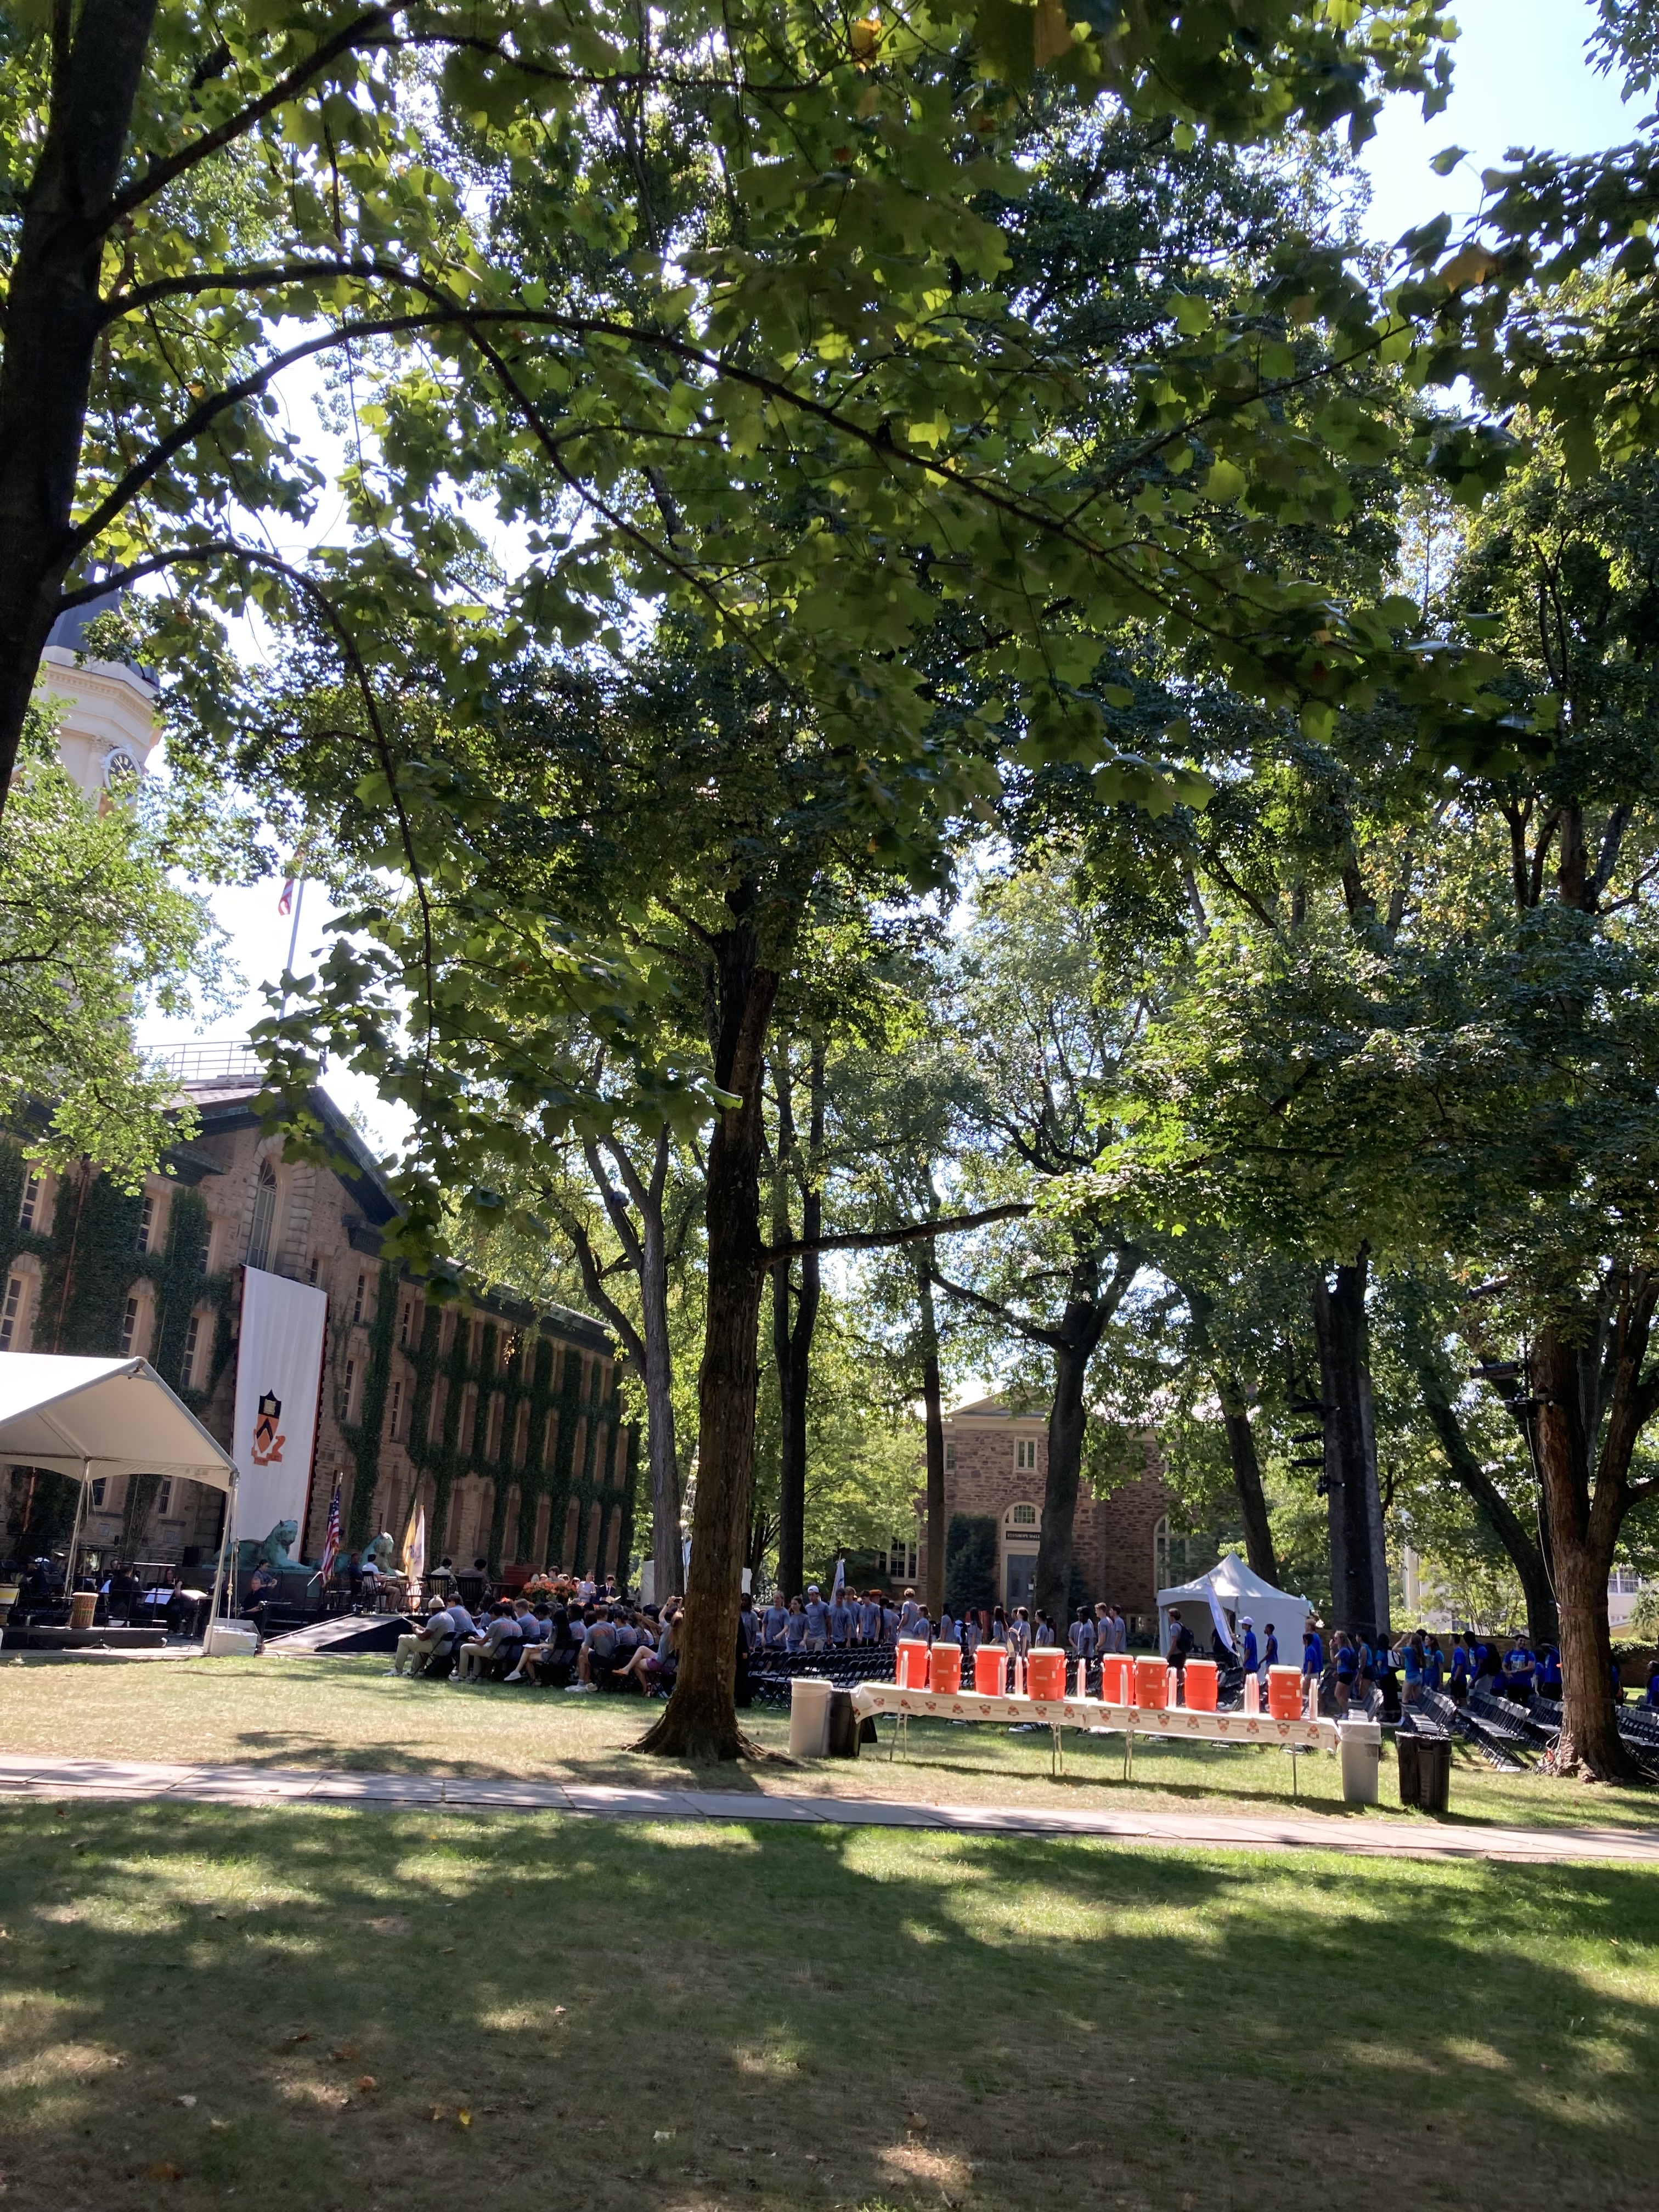 an audience of chairs faces the front of Nassau Hall, a table with water jugs is in the foreground